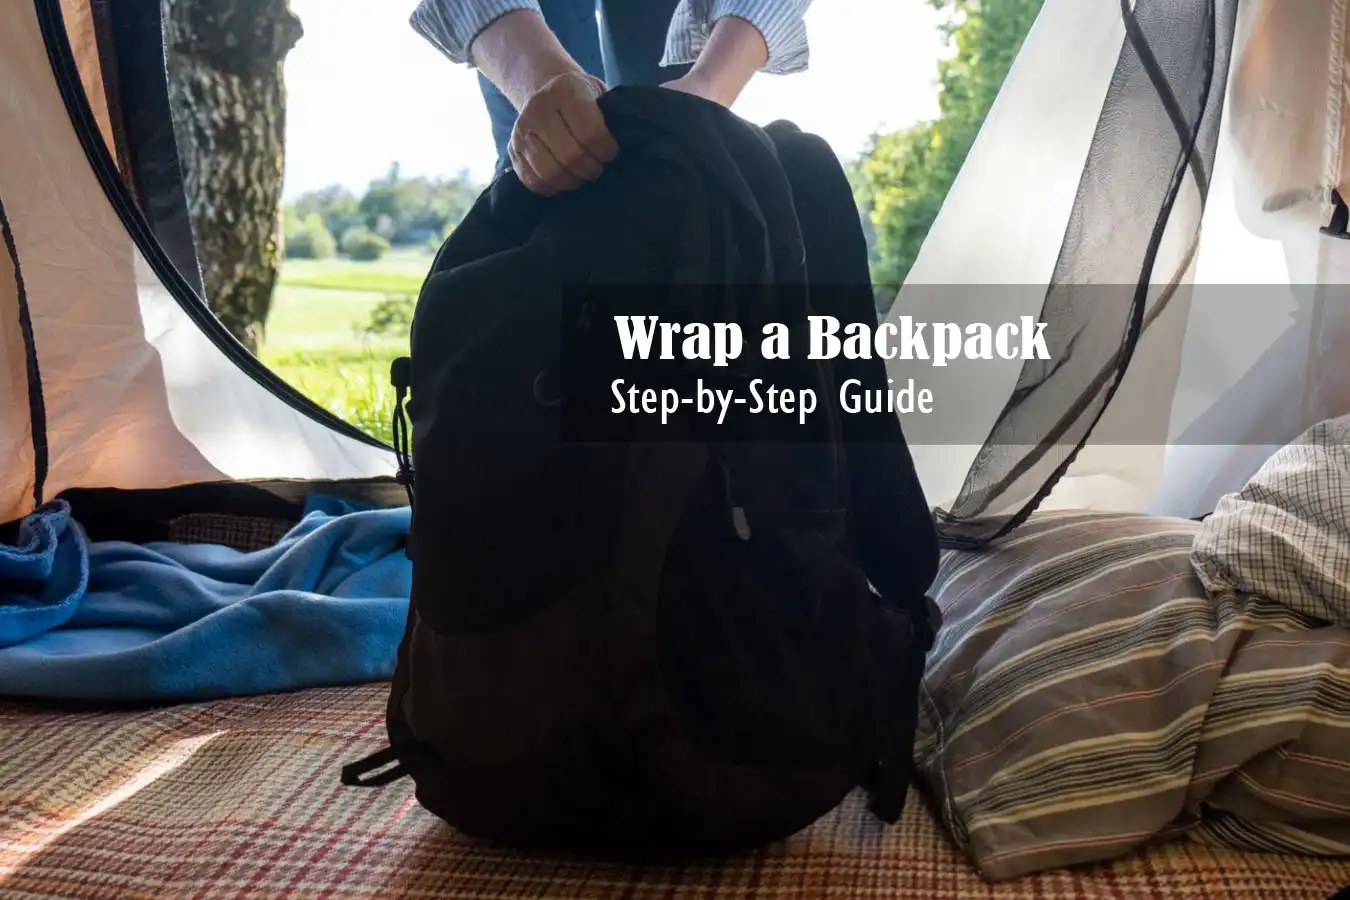 Wrap a Backpack Without Damage